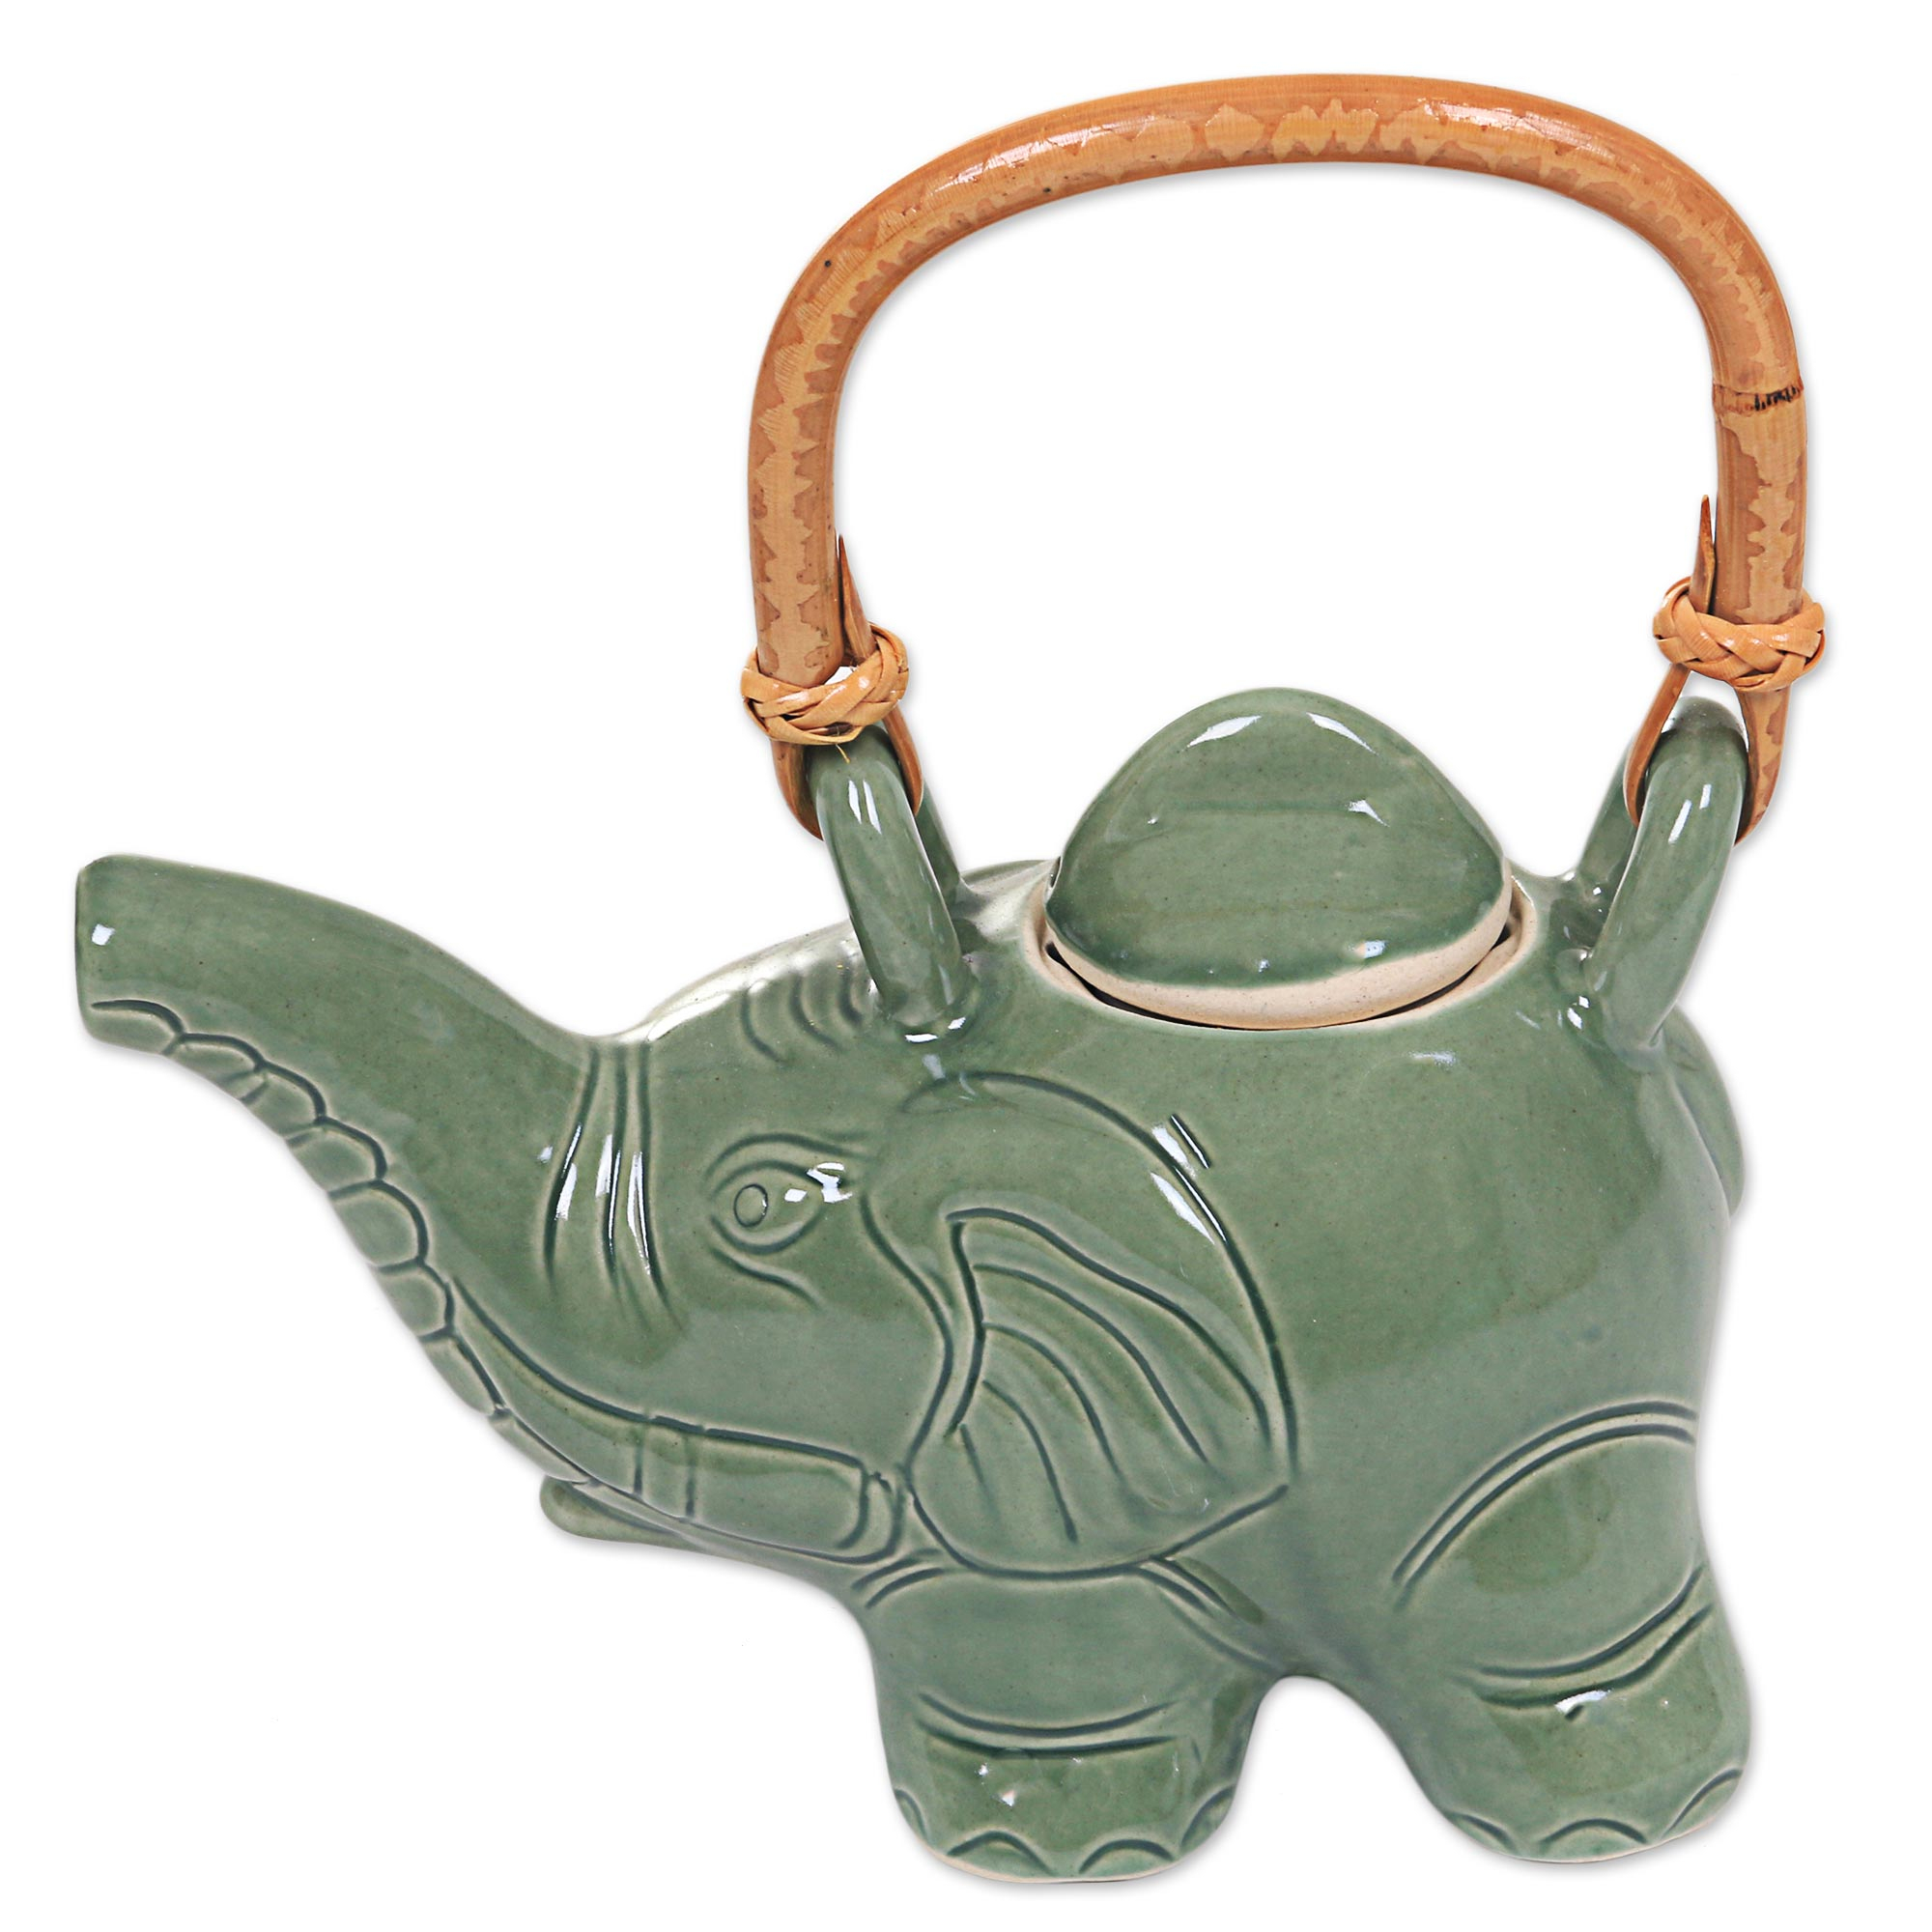 Artisan Crafted Ceramic Elephant Teapot with Rattan Handle - Cute ...